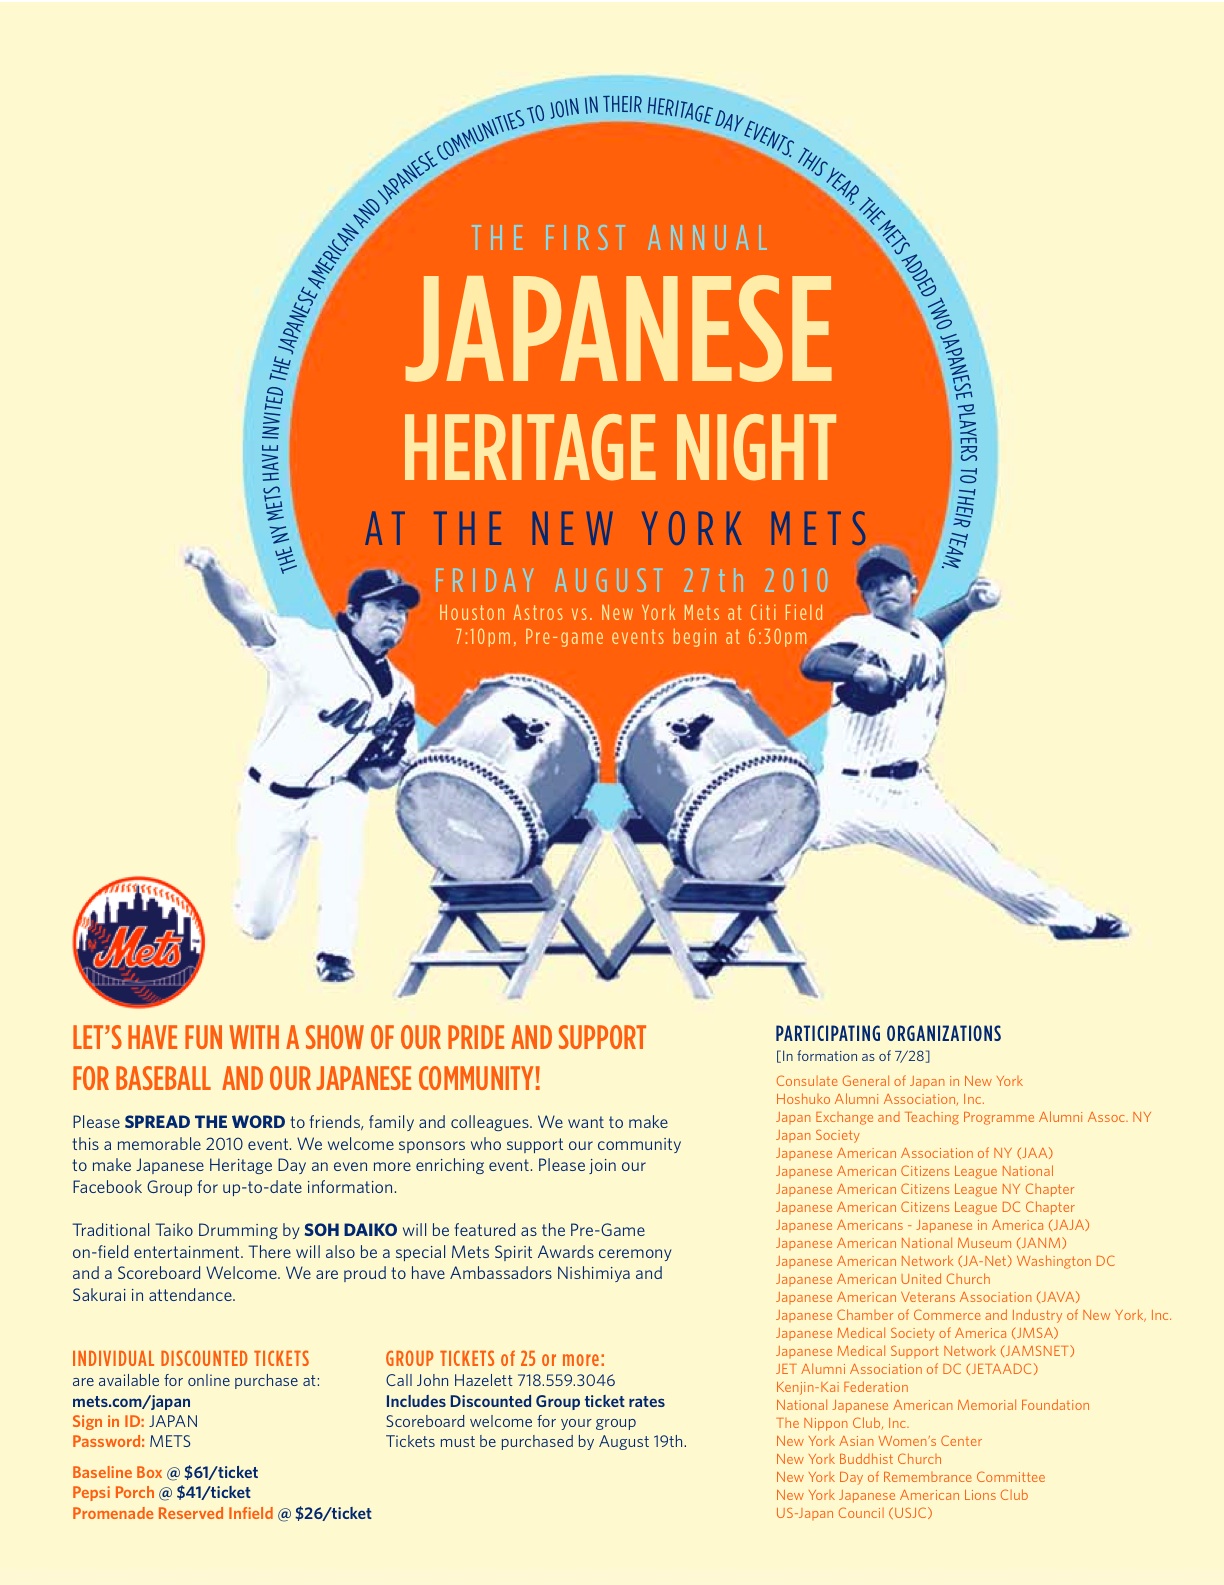  New York Mets Tap JETs for Inaugural Japanese